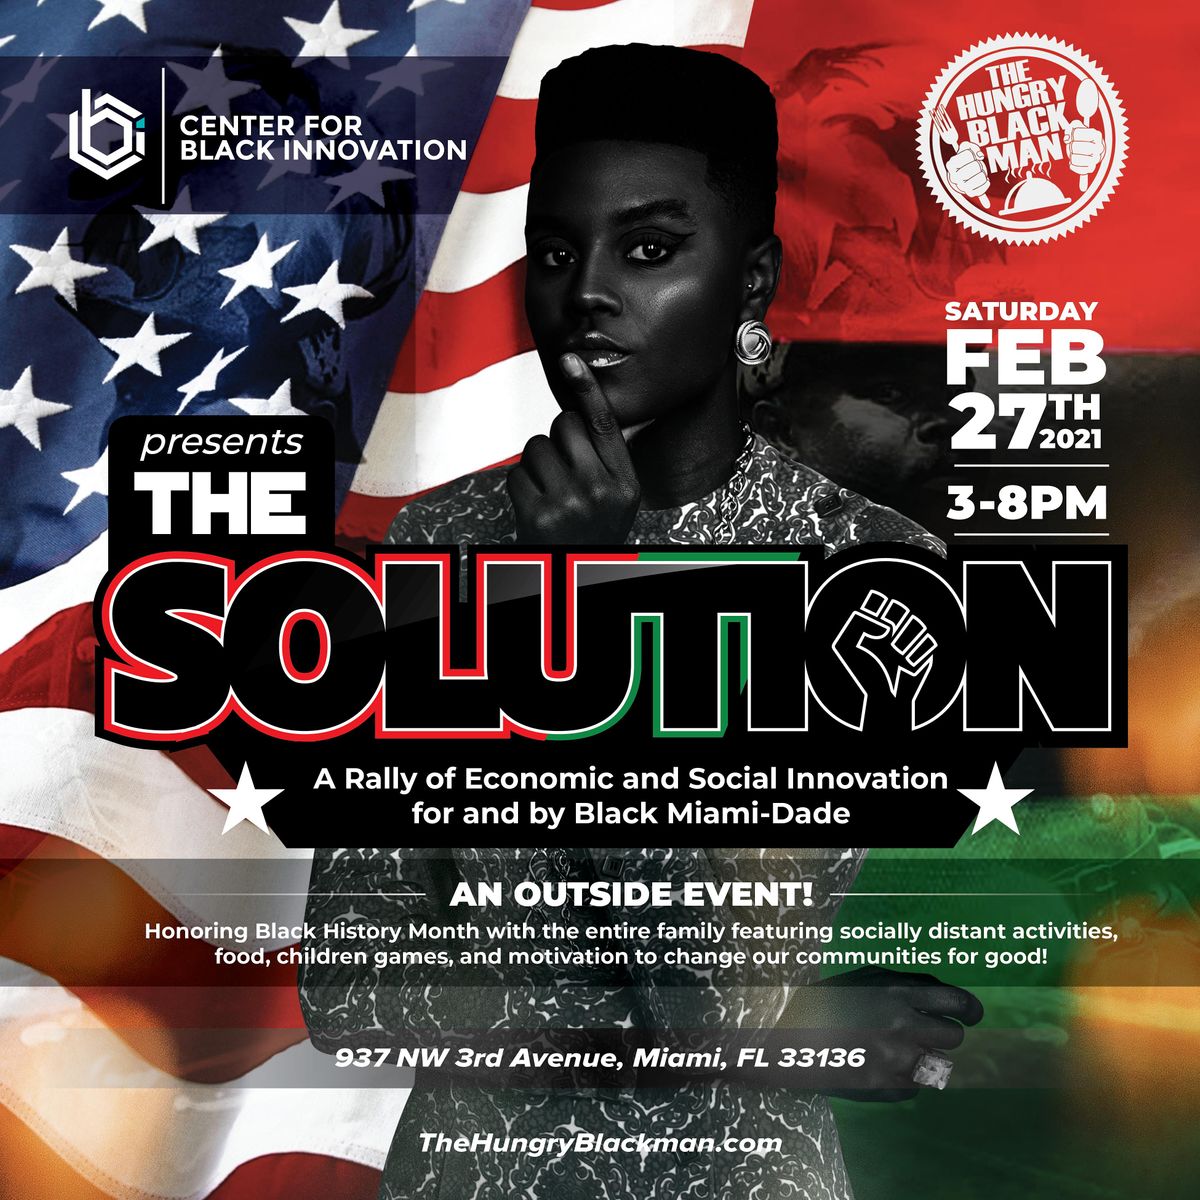 The Black Miami Solution and Innovation Rally